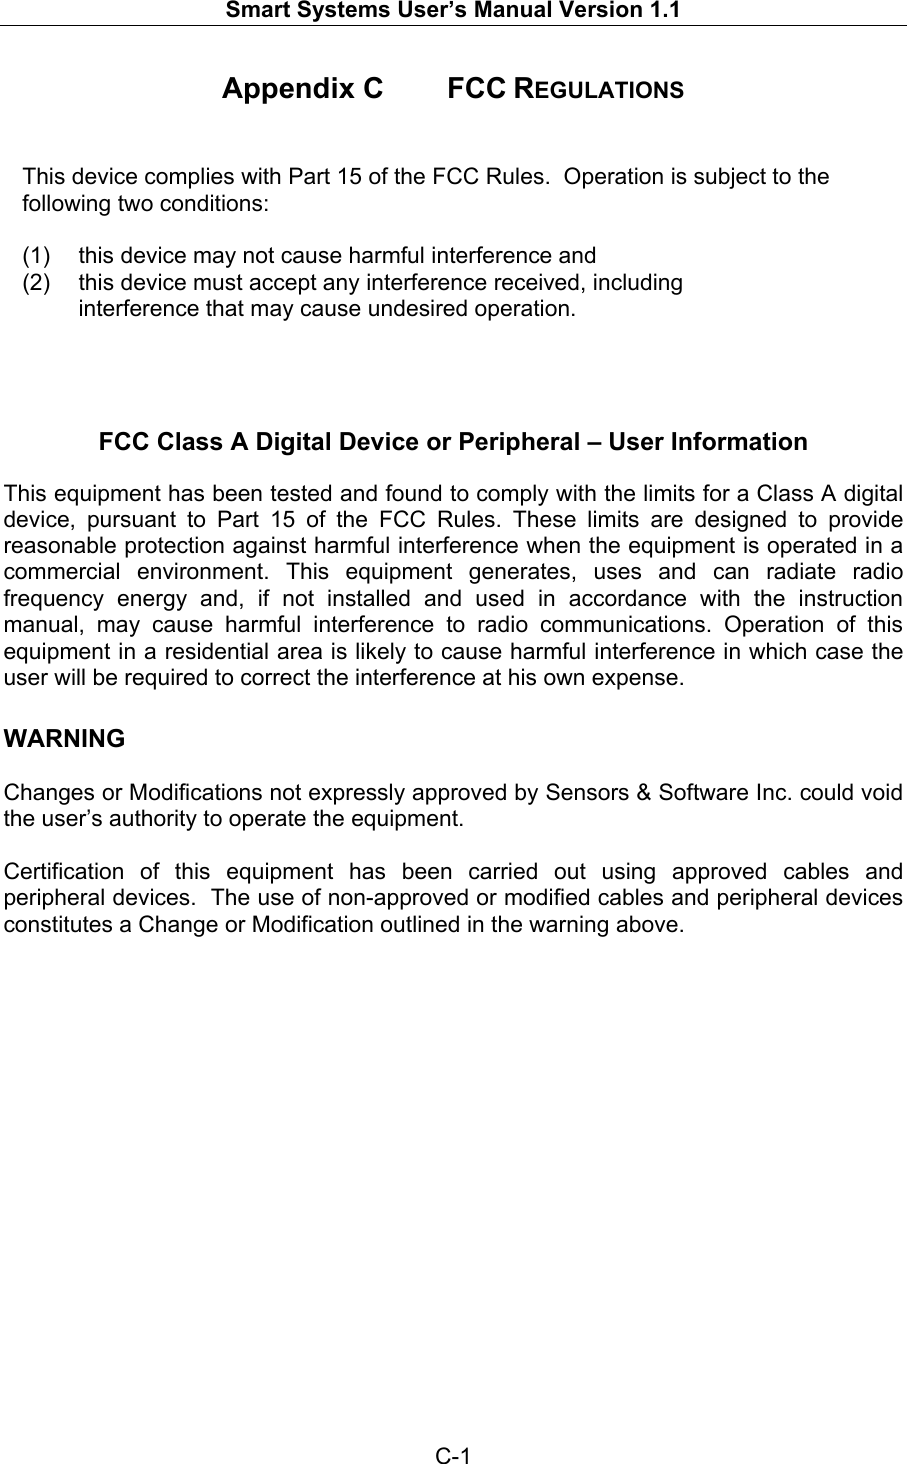   Smart Systems User’s Manual Version 1.1  C-1  Appendix C   FCC REGULATIONS   This device complies with Part 15 of the FCC Rules.  Operation is subject to the following two conditions:  (1)  this device may not cause harmful interference and (2)  this device must accept any interference received, including interference that may cause undesired operation.     FCC Class A Digital Device or Peripheral – User Information  This equipment has been tested and found to comply with the limits for a Class A digital  device, pursuant to Part 15 of the FCC Rules. These limits are designed to provide reasonable protection against harmful interference when the equipment is operated in a commercial environment. This equipment generates, uses and can radiate radio frequency energy and, if not installed and used in accordance with the instruction manual, may cause harmful interference to radio communications. Operation of this equipment in a residential area is likely to cause harmful interference in which case the user will be required to correct the interference at his own expense.  WARNING  Changes or Modifications not expressly approved by Sensors &amp; Software Inc. could void the user’s authority to operate the equipment.  Certification of this equipment has been carried out using approved cables and peripheral devices.  The use of non-approved or modified cables and peripheral devices constitutes a Change or Modification outlined in the warning above.  